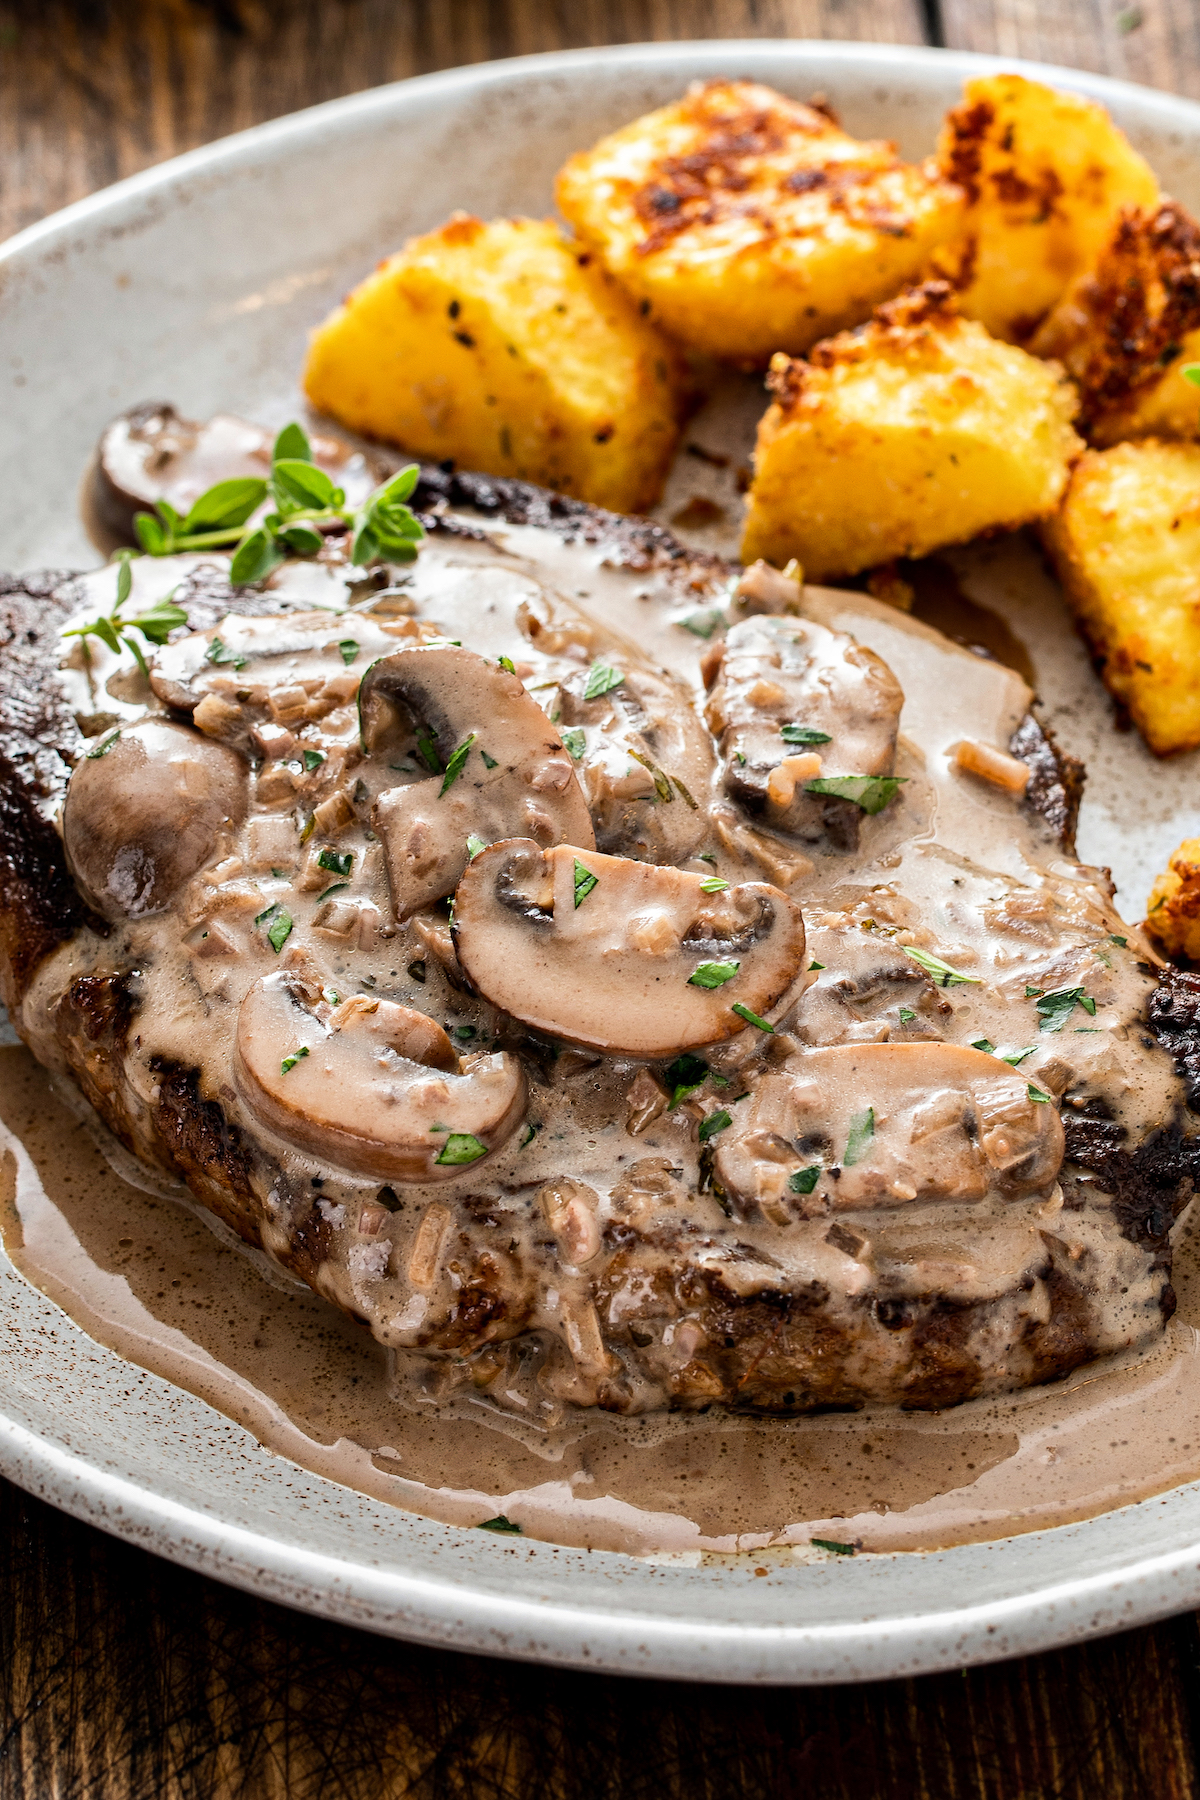 Close-up shot of a steak smothered in mushrooms and creamy sauce.